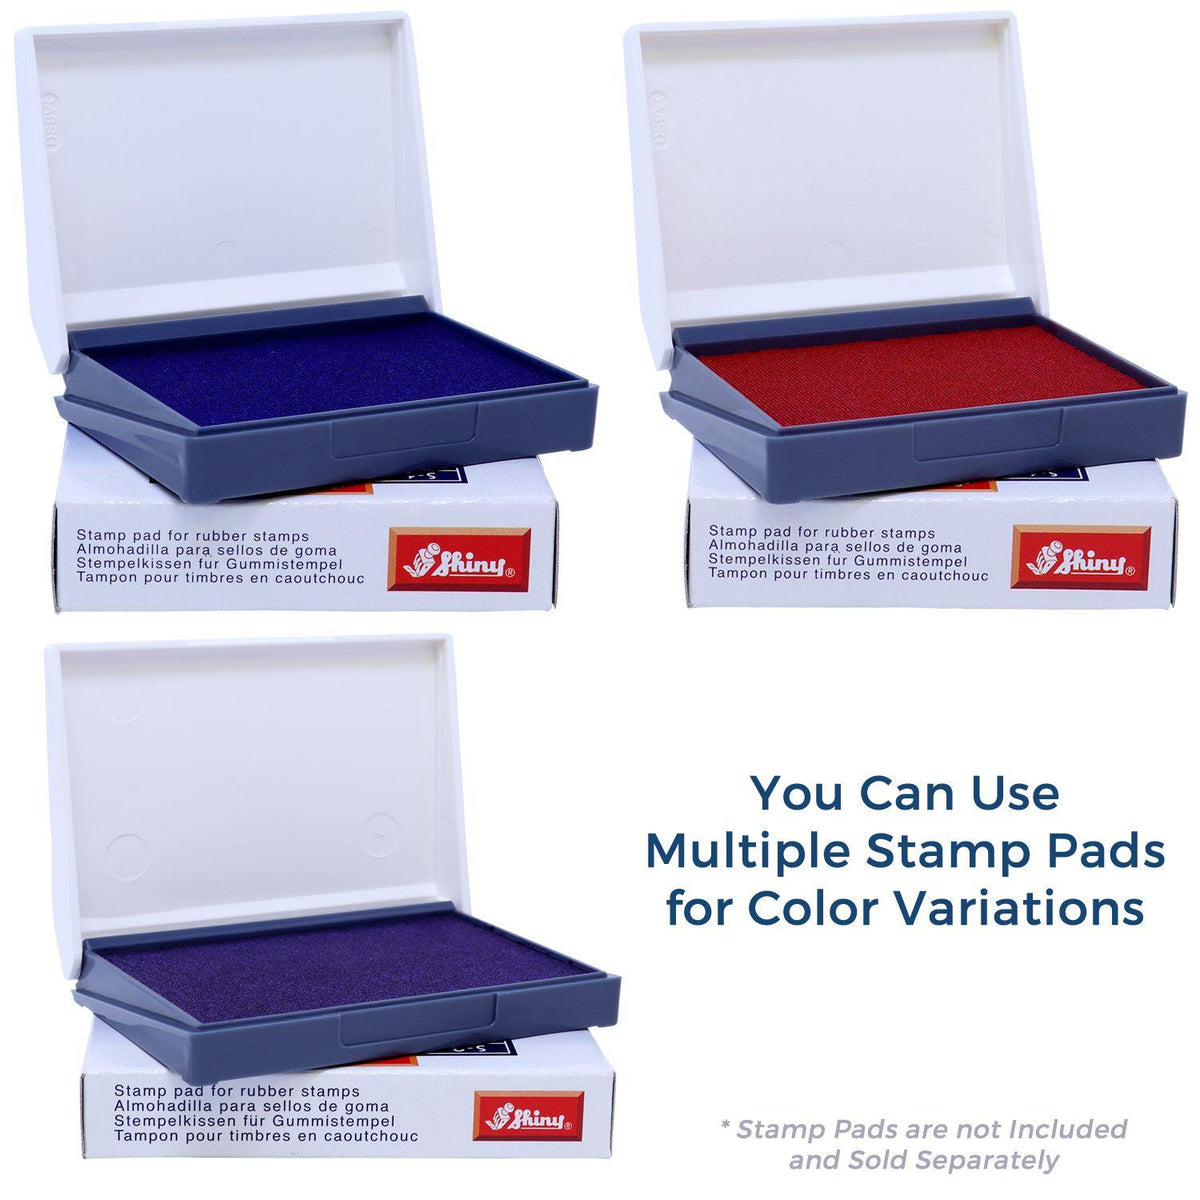 Stamp Pads for Large Memo Billed Rubber Stamp Available